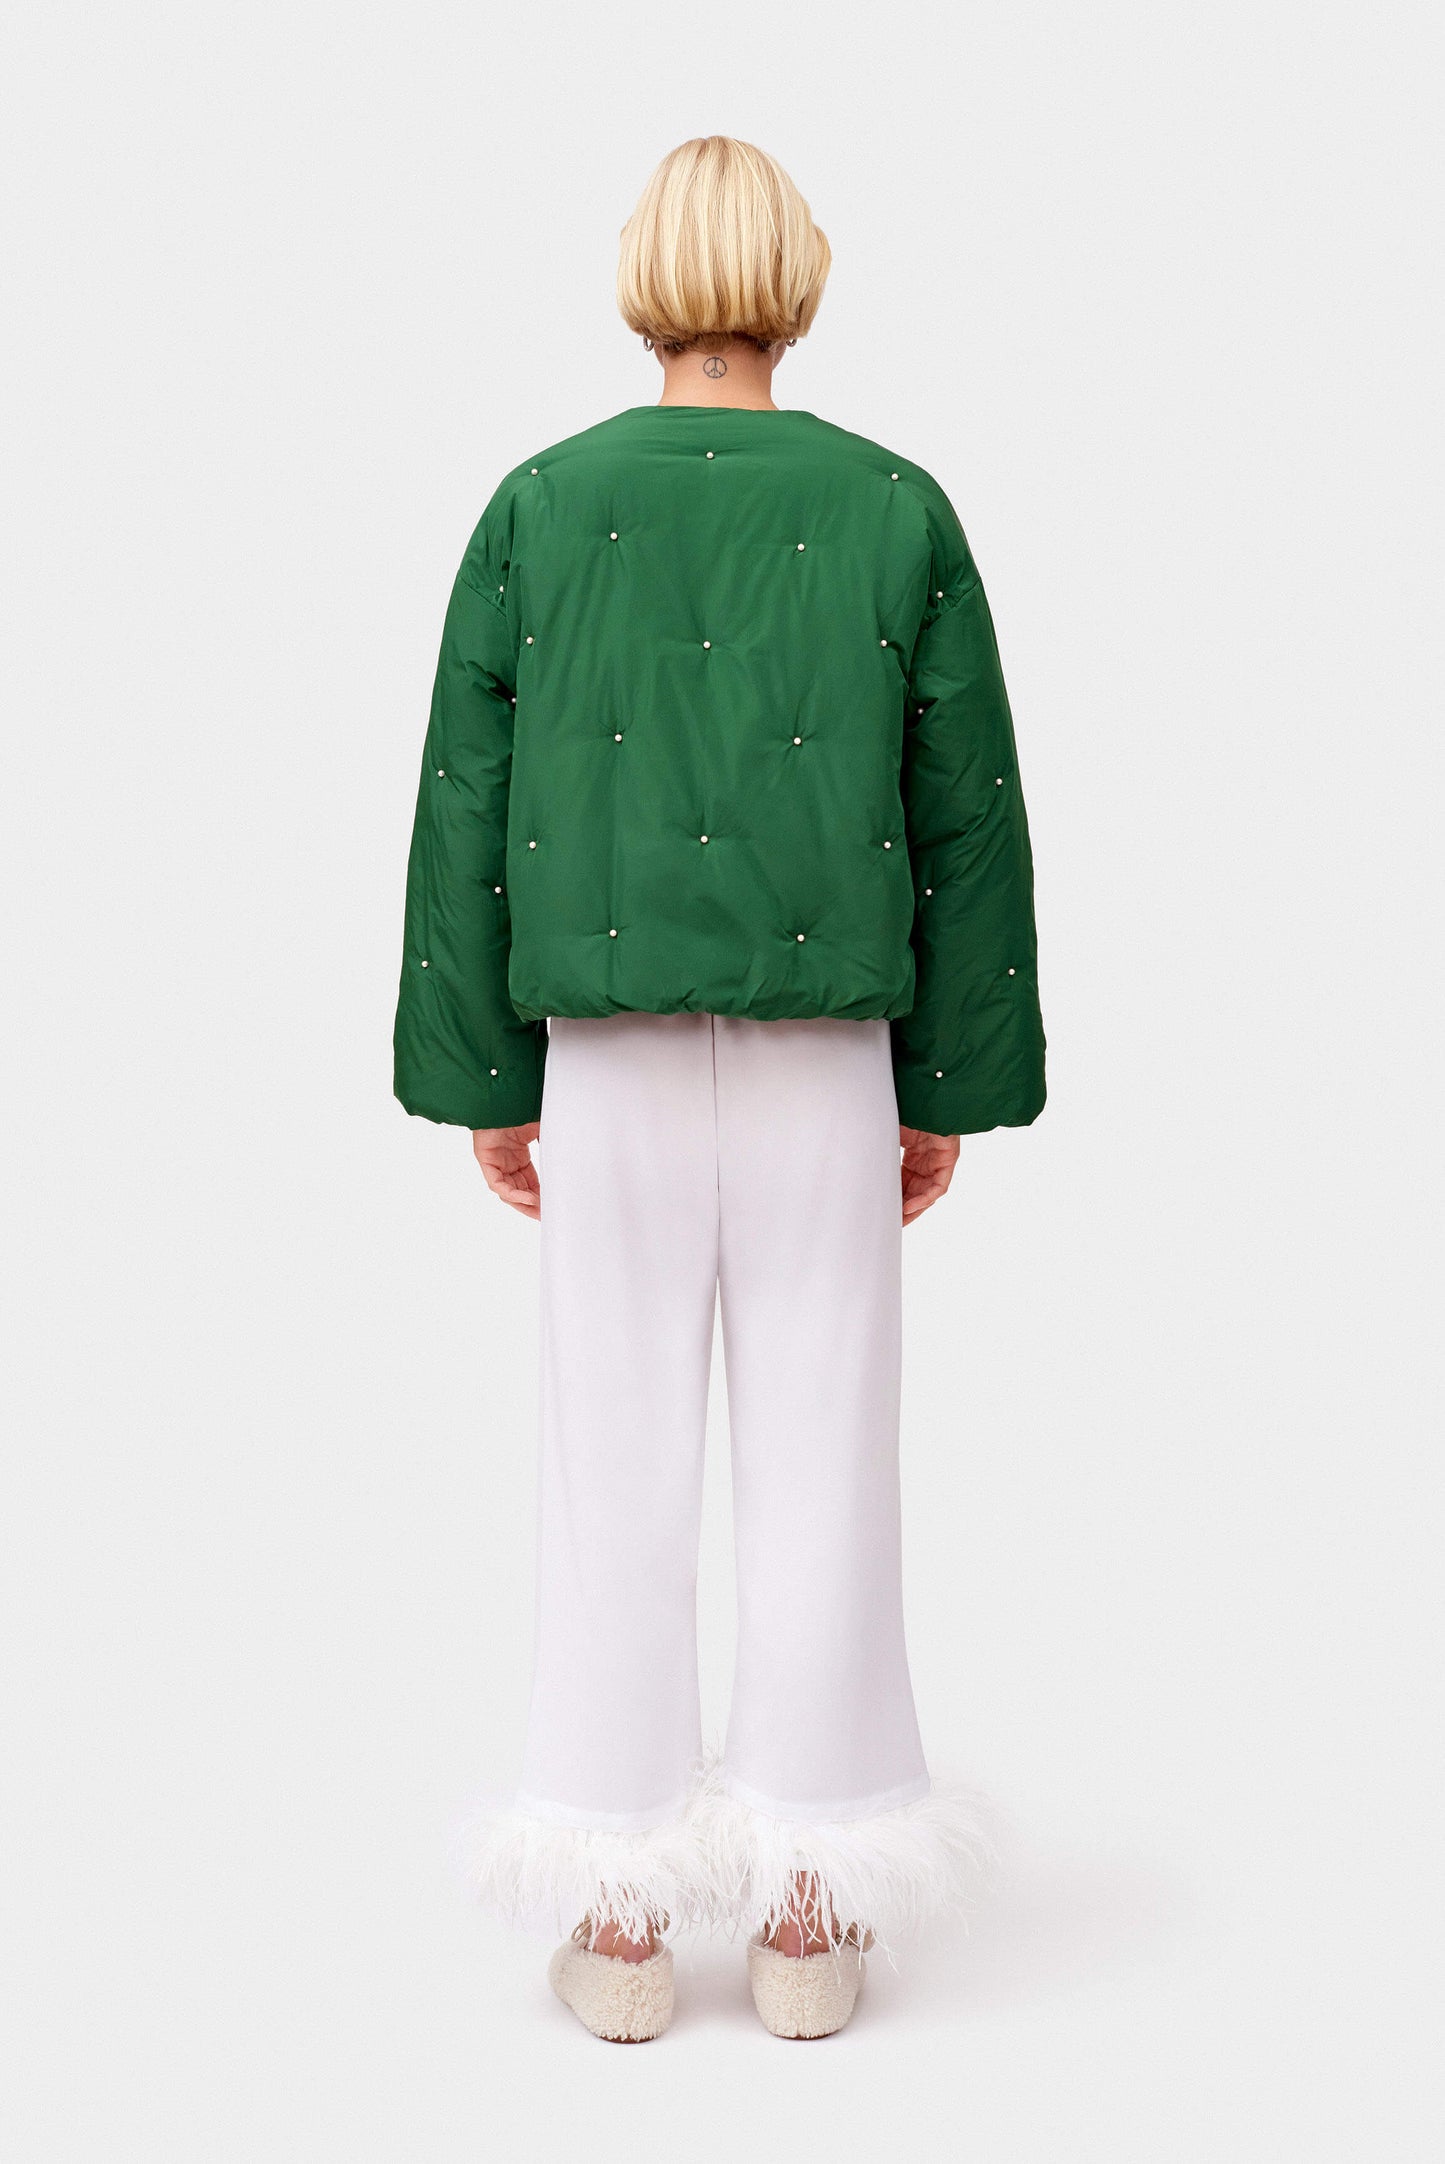 Puffer Jacket in Green with Pearl details